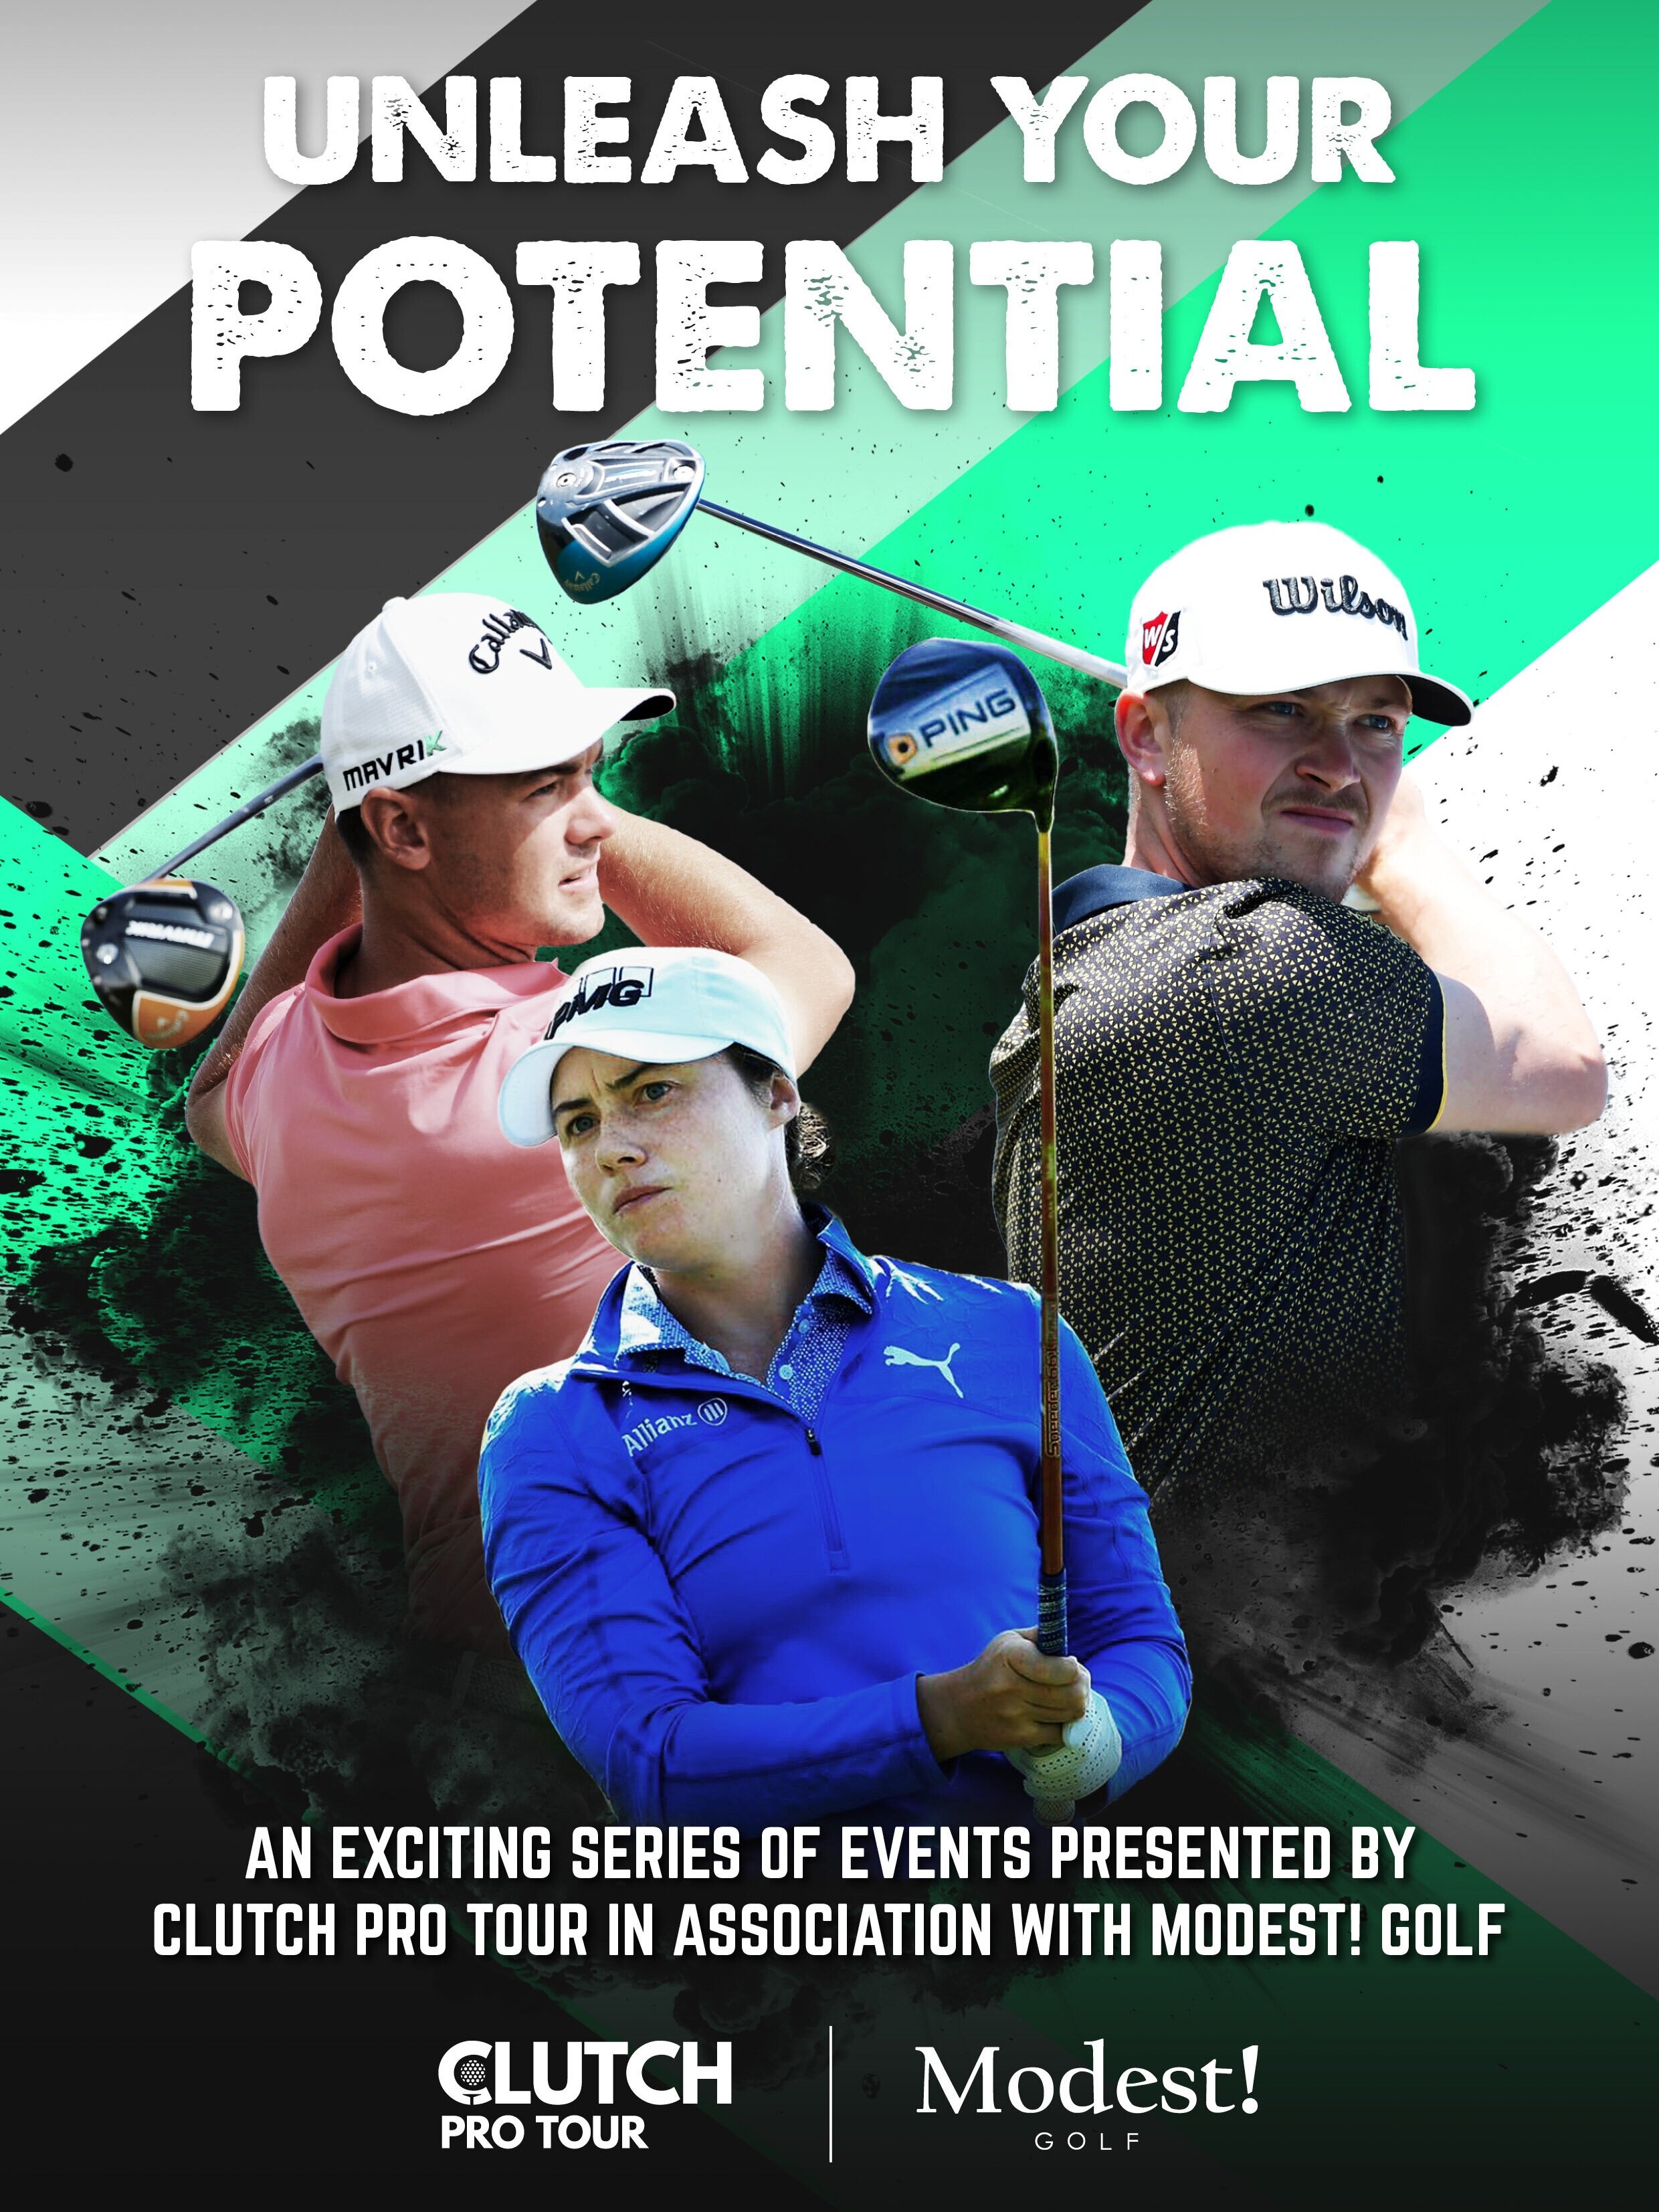 Modest Golf confirms new partnership with Clutch Pro Tour